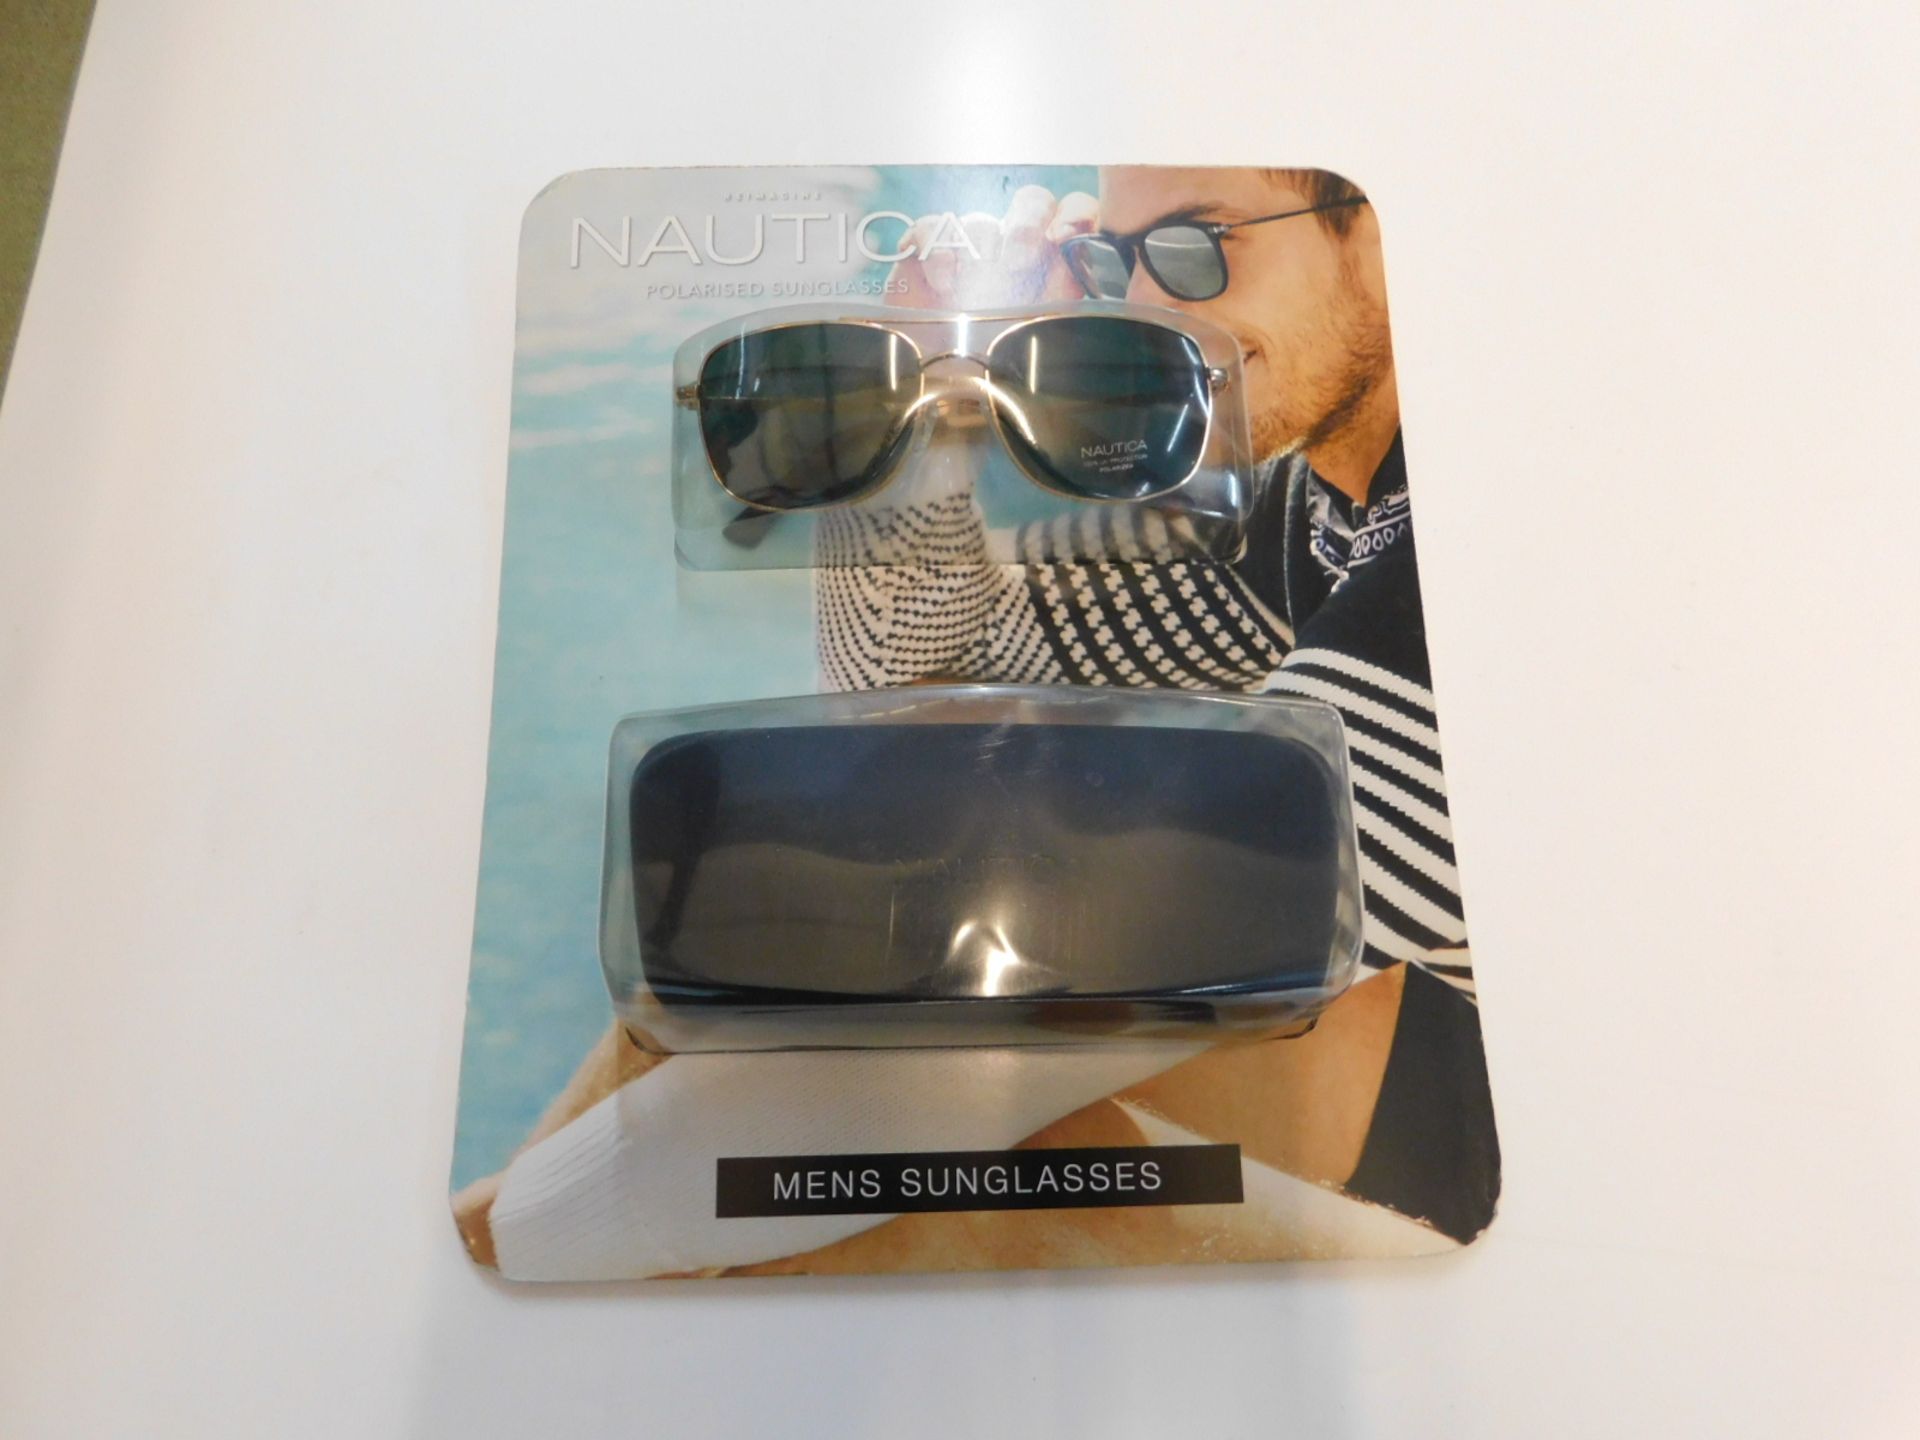 1 PACK OF NAUTICA SUNGLASESS WITH CASE RRP £69.99